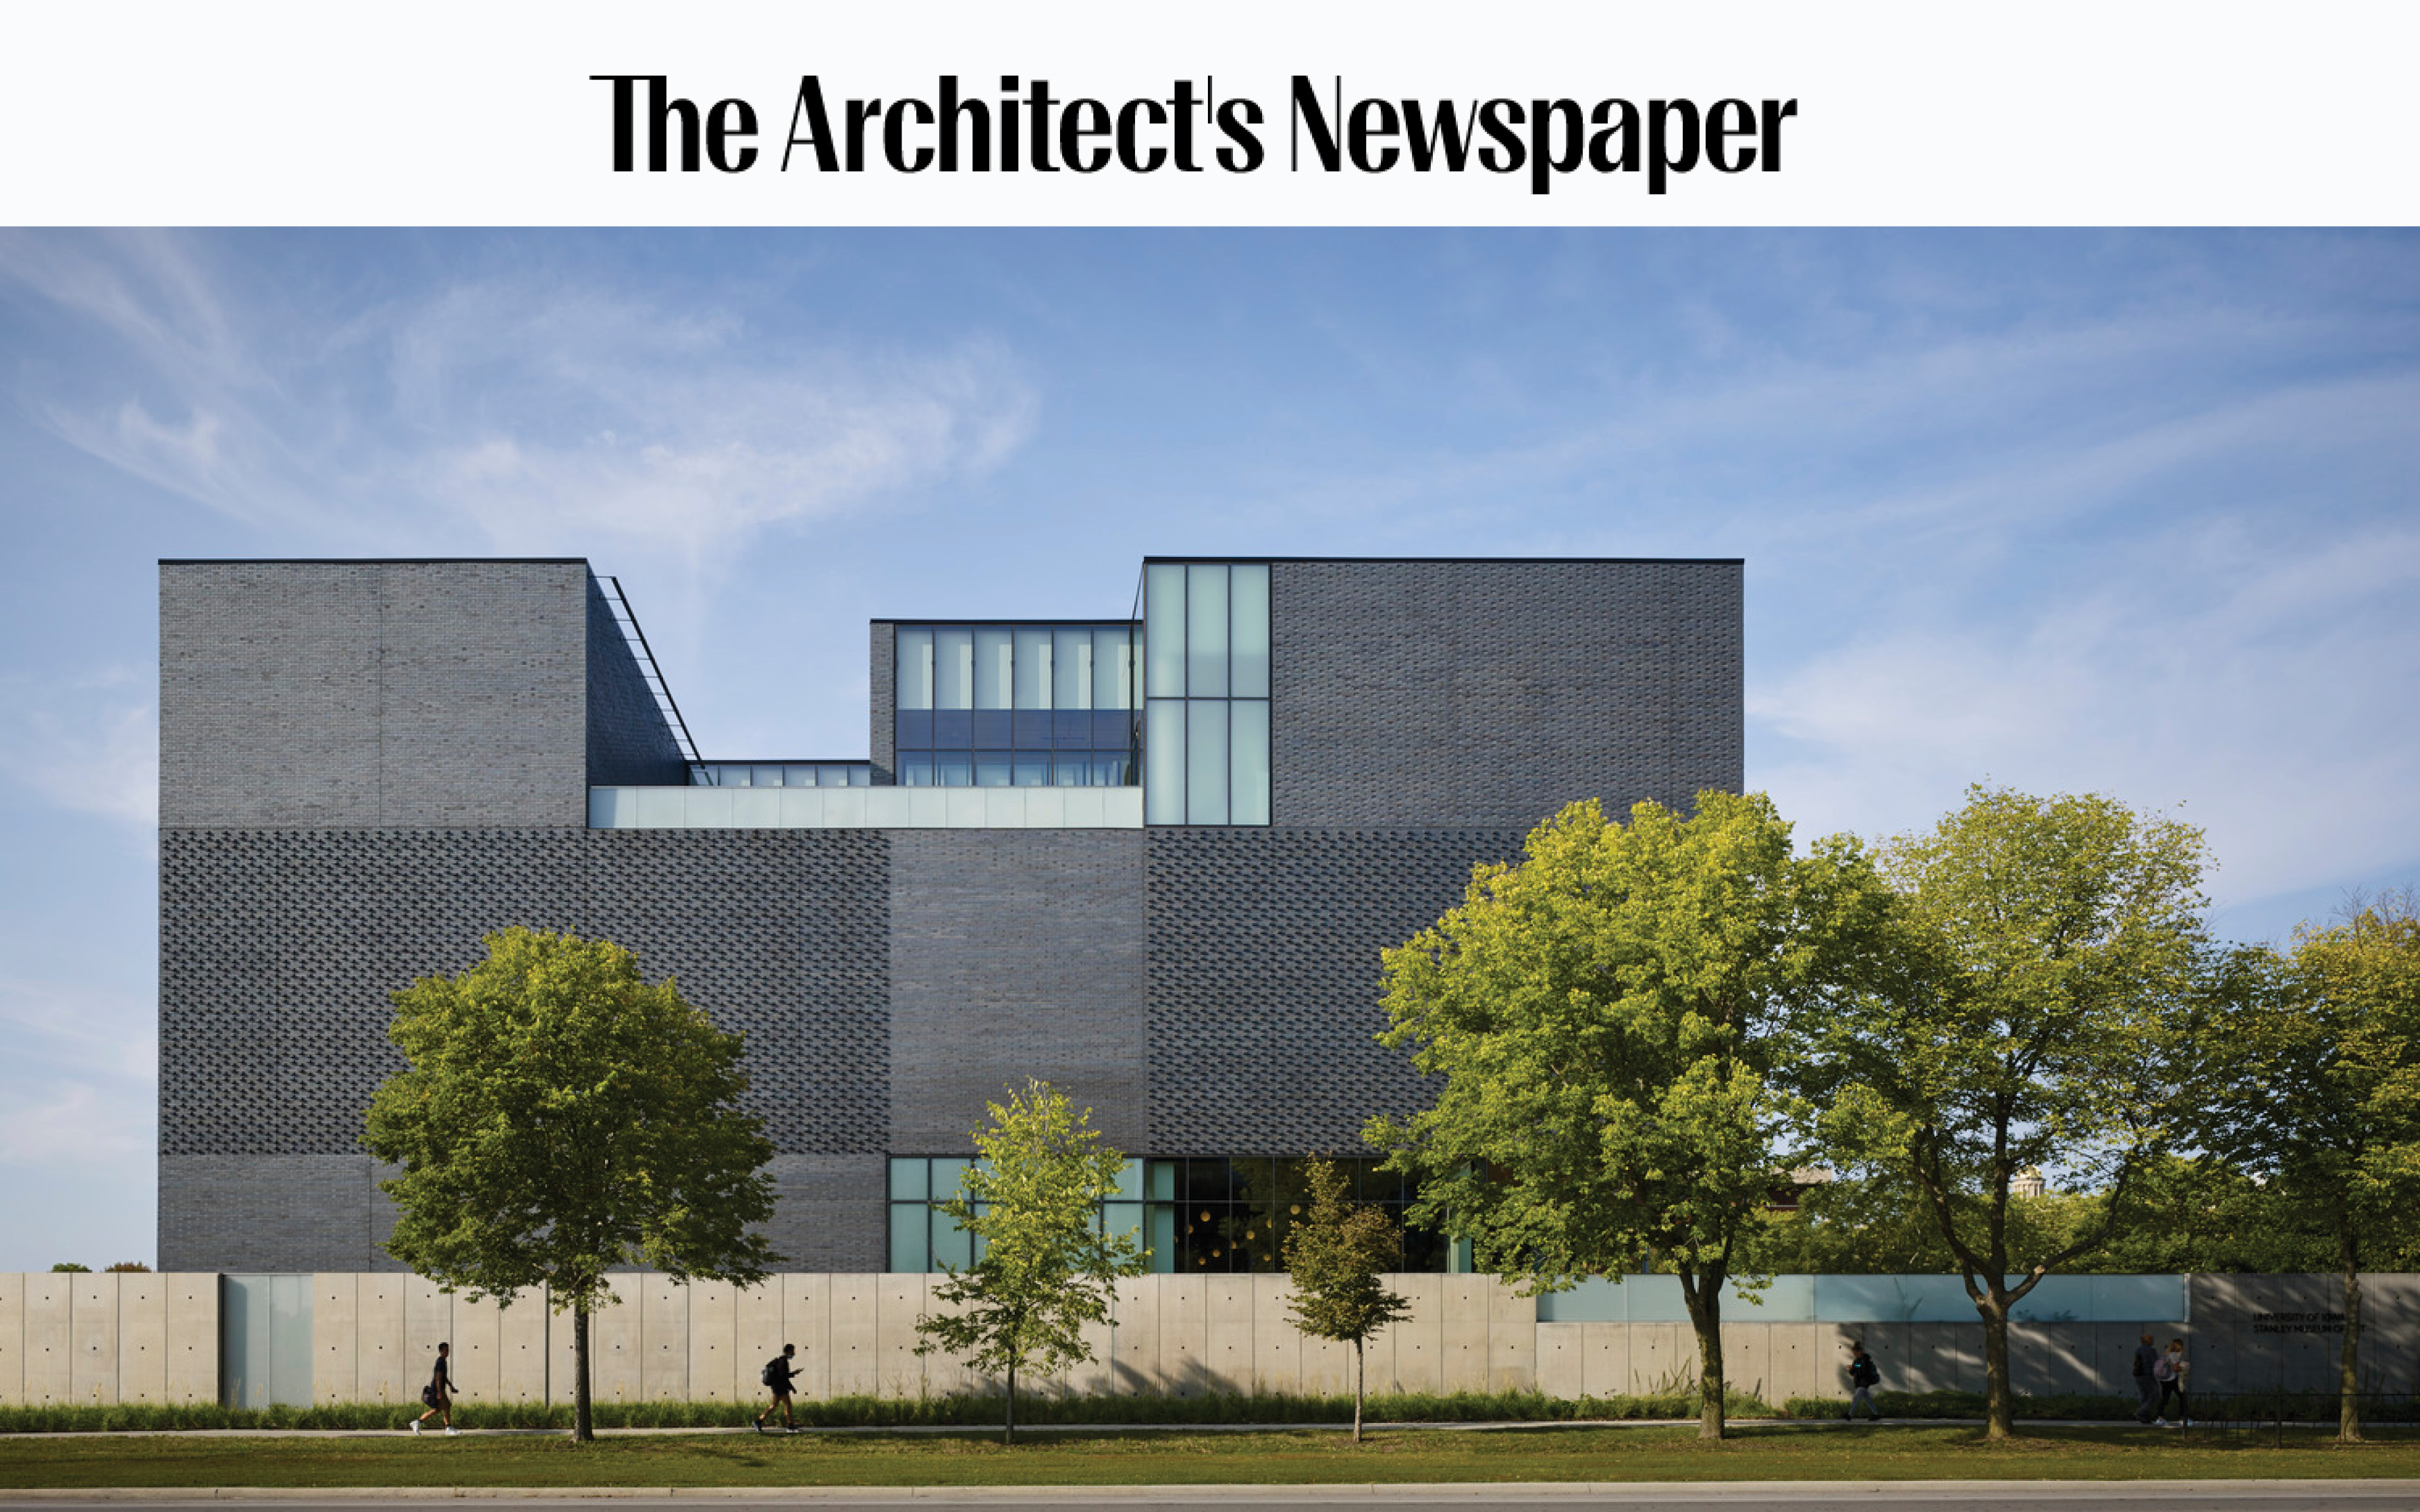 BNIM Shares Design Details of the Stanley Museum of Art’s Façade in The Architect’s Newspaper